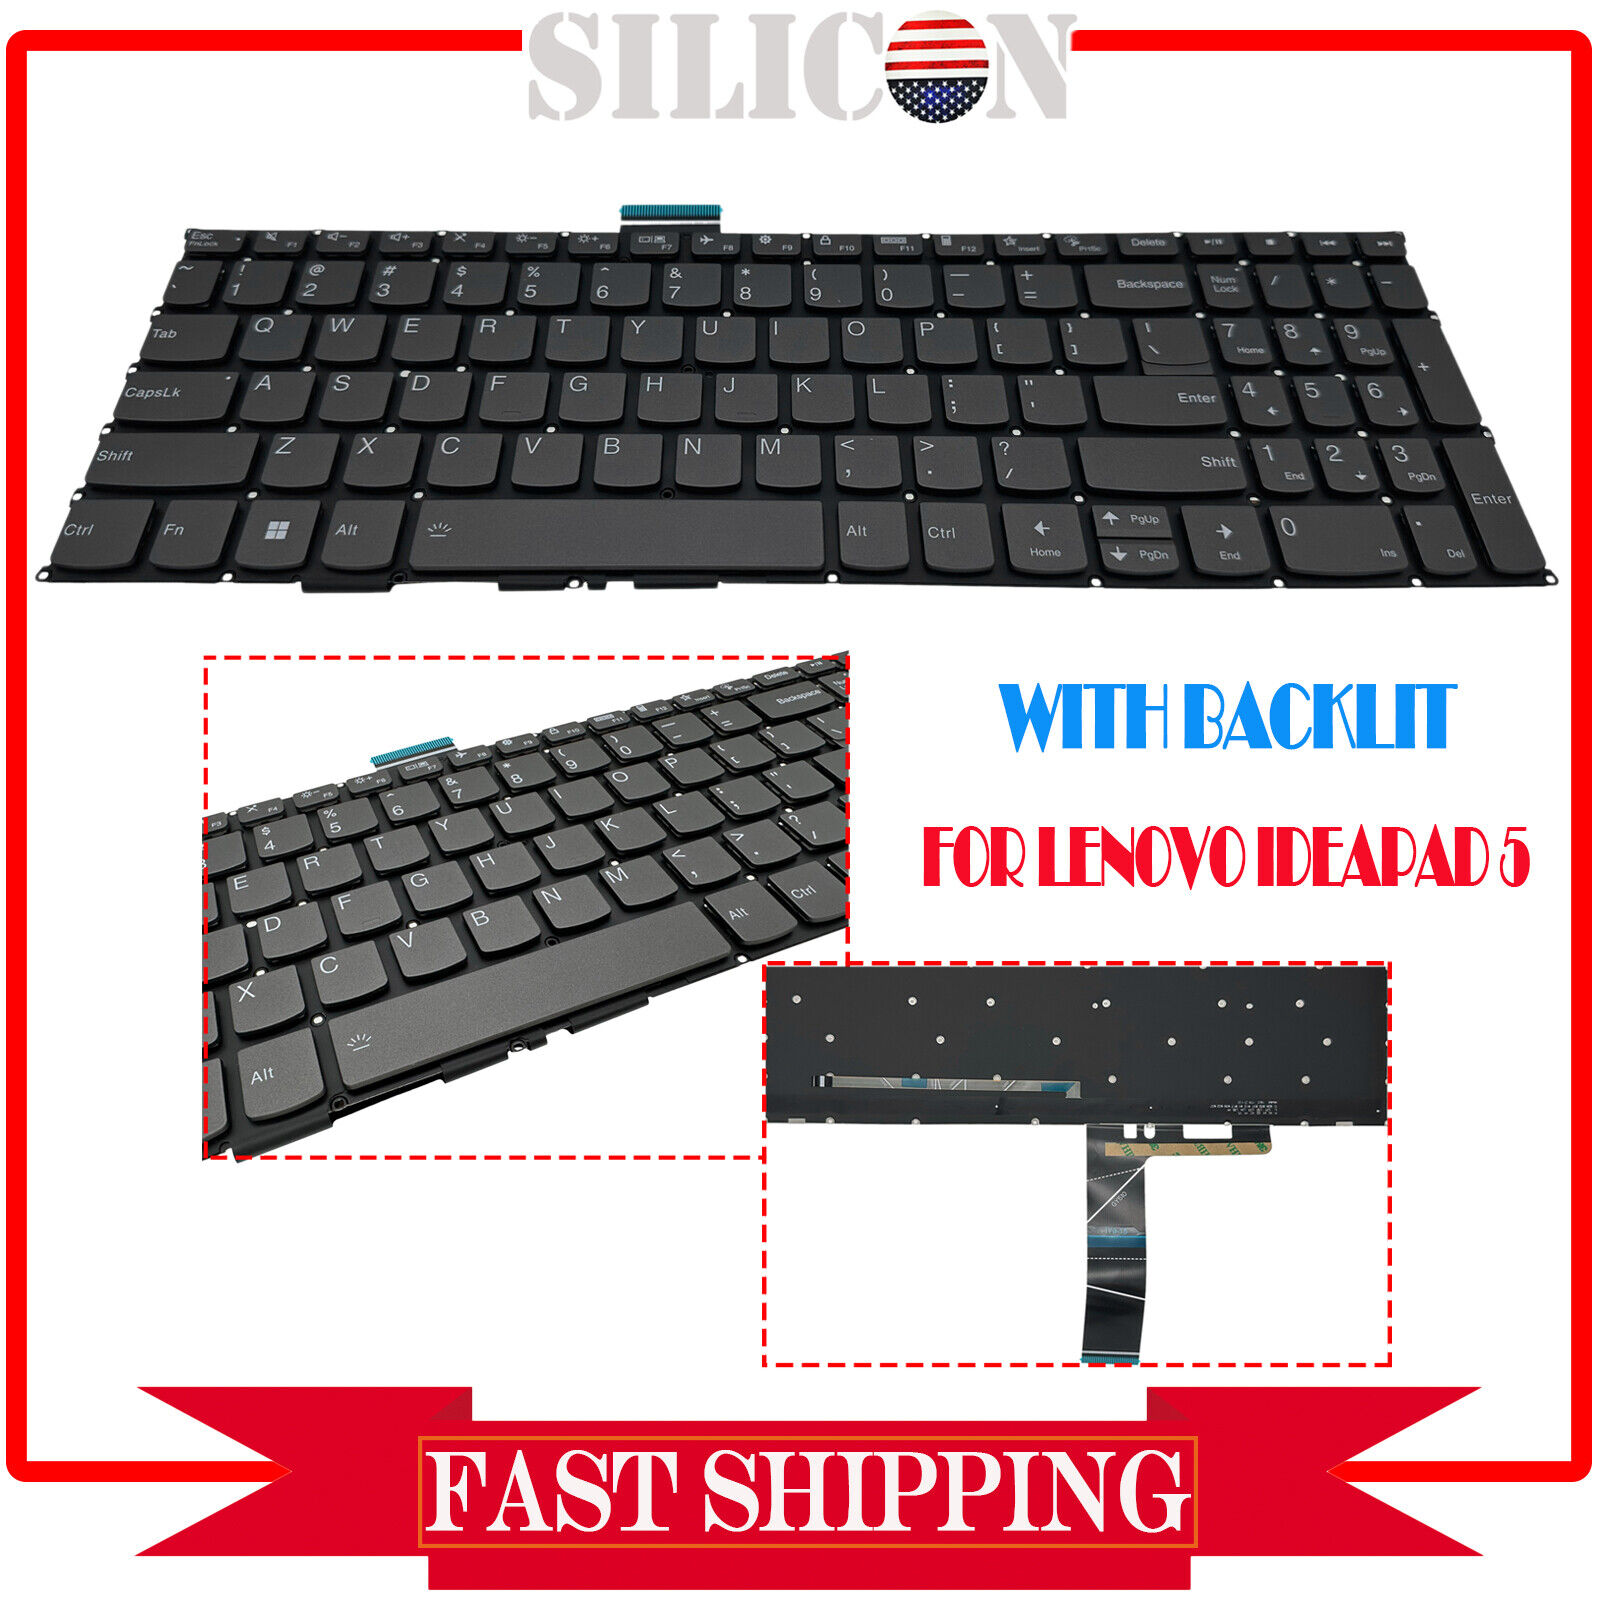 Laptop Keyboard For Lenovo Ideapad 3-15ADA6 3-15ALC6 3-15ITL6 With Backlit US